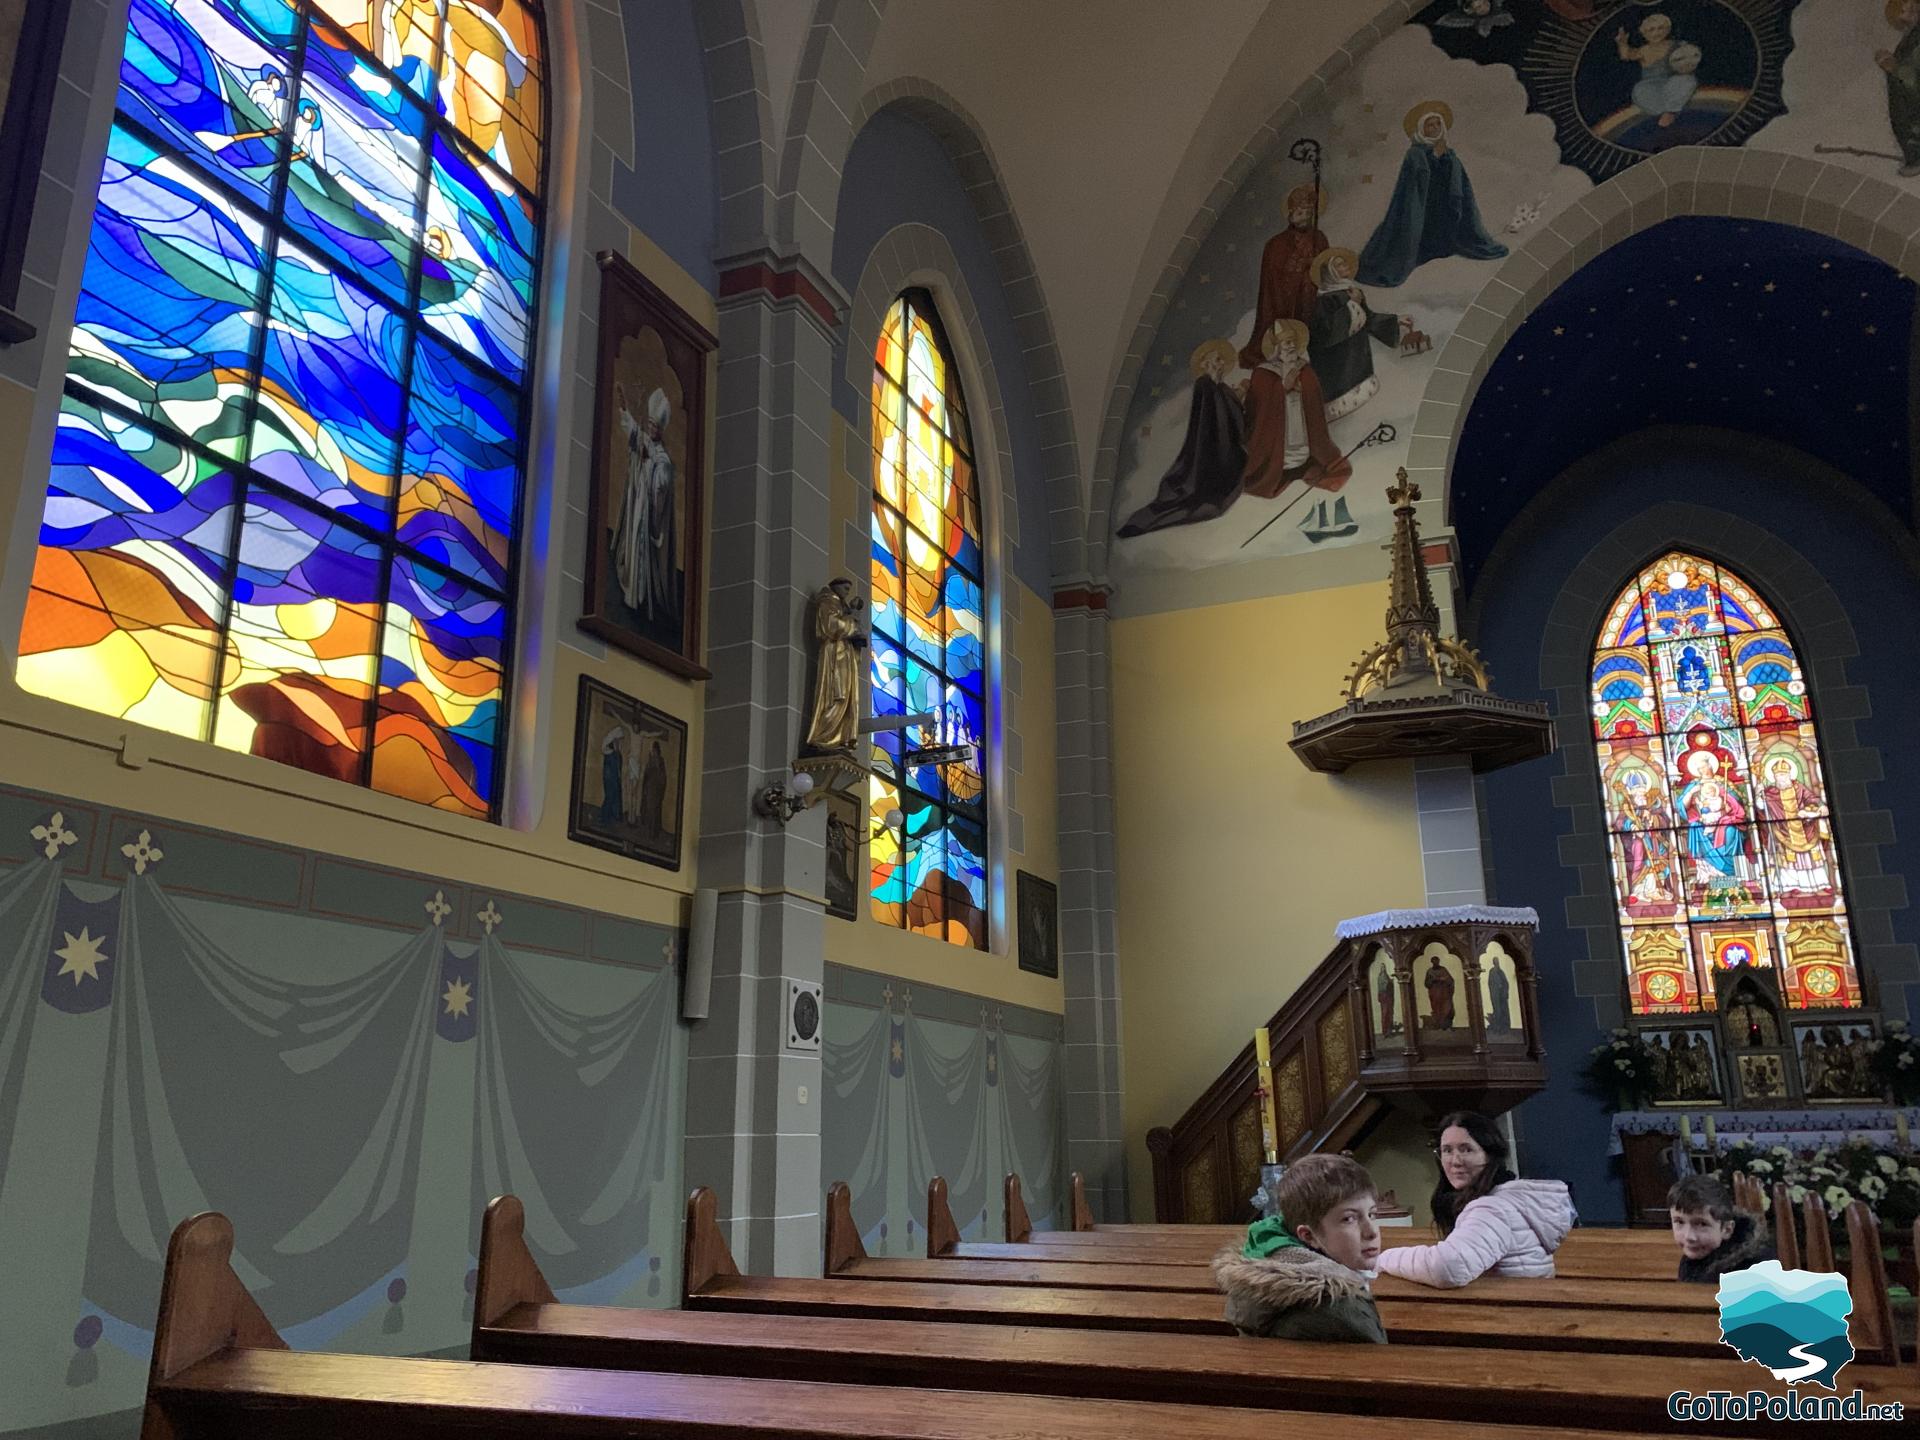 church interior with colorful stained glass windows